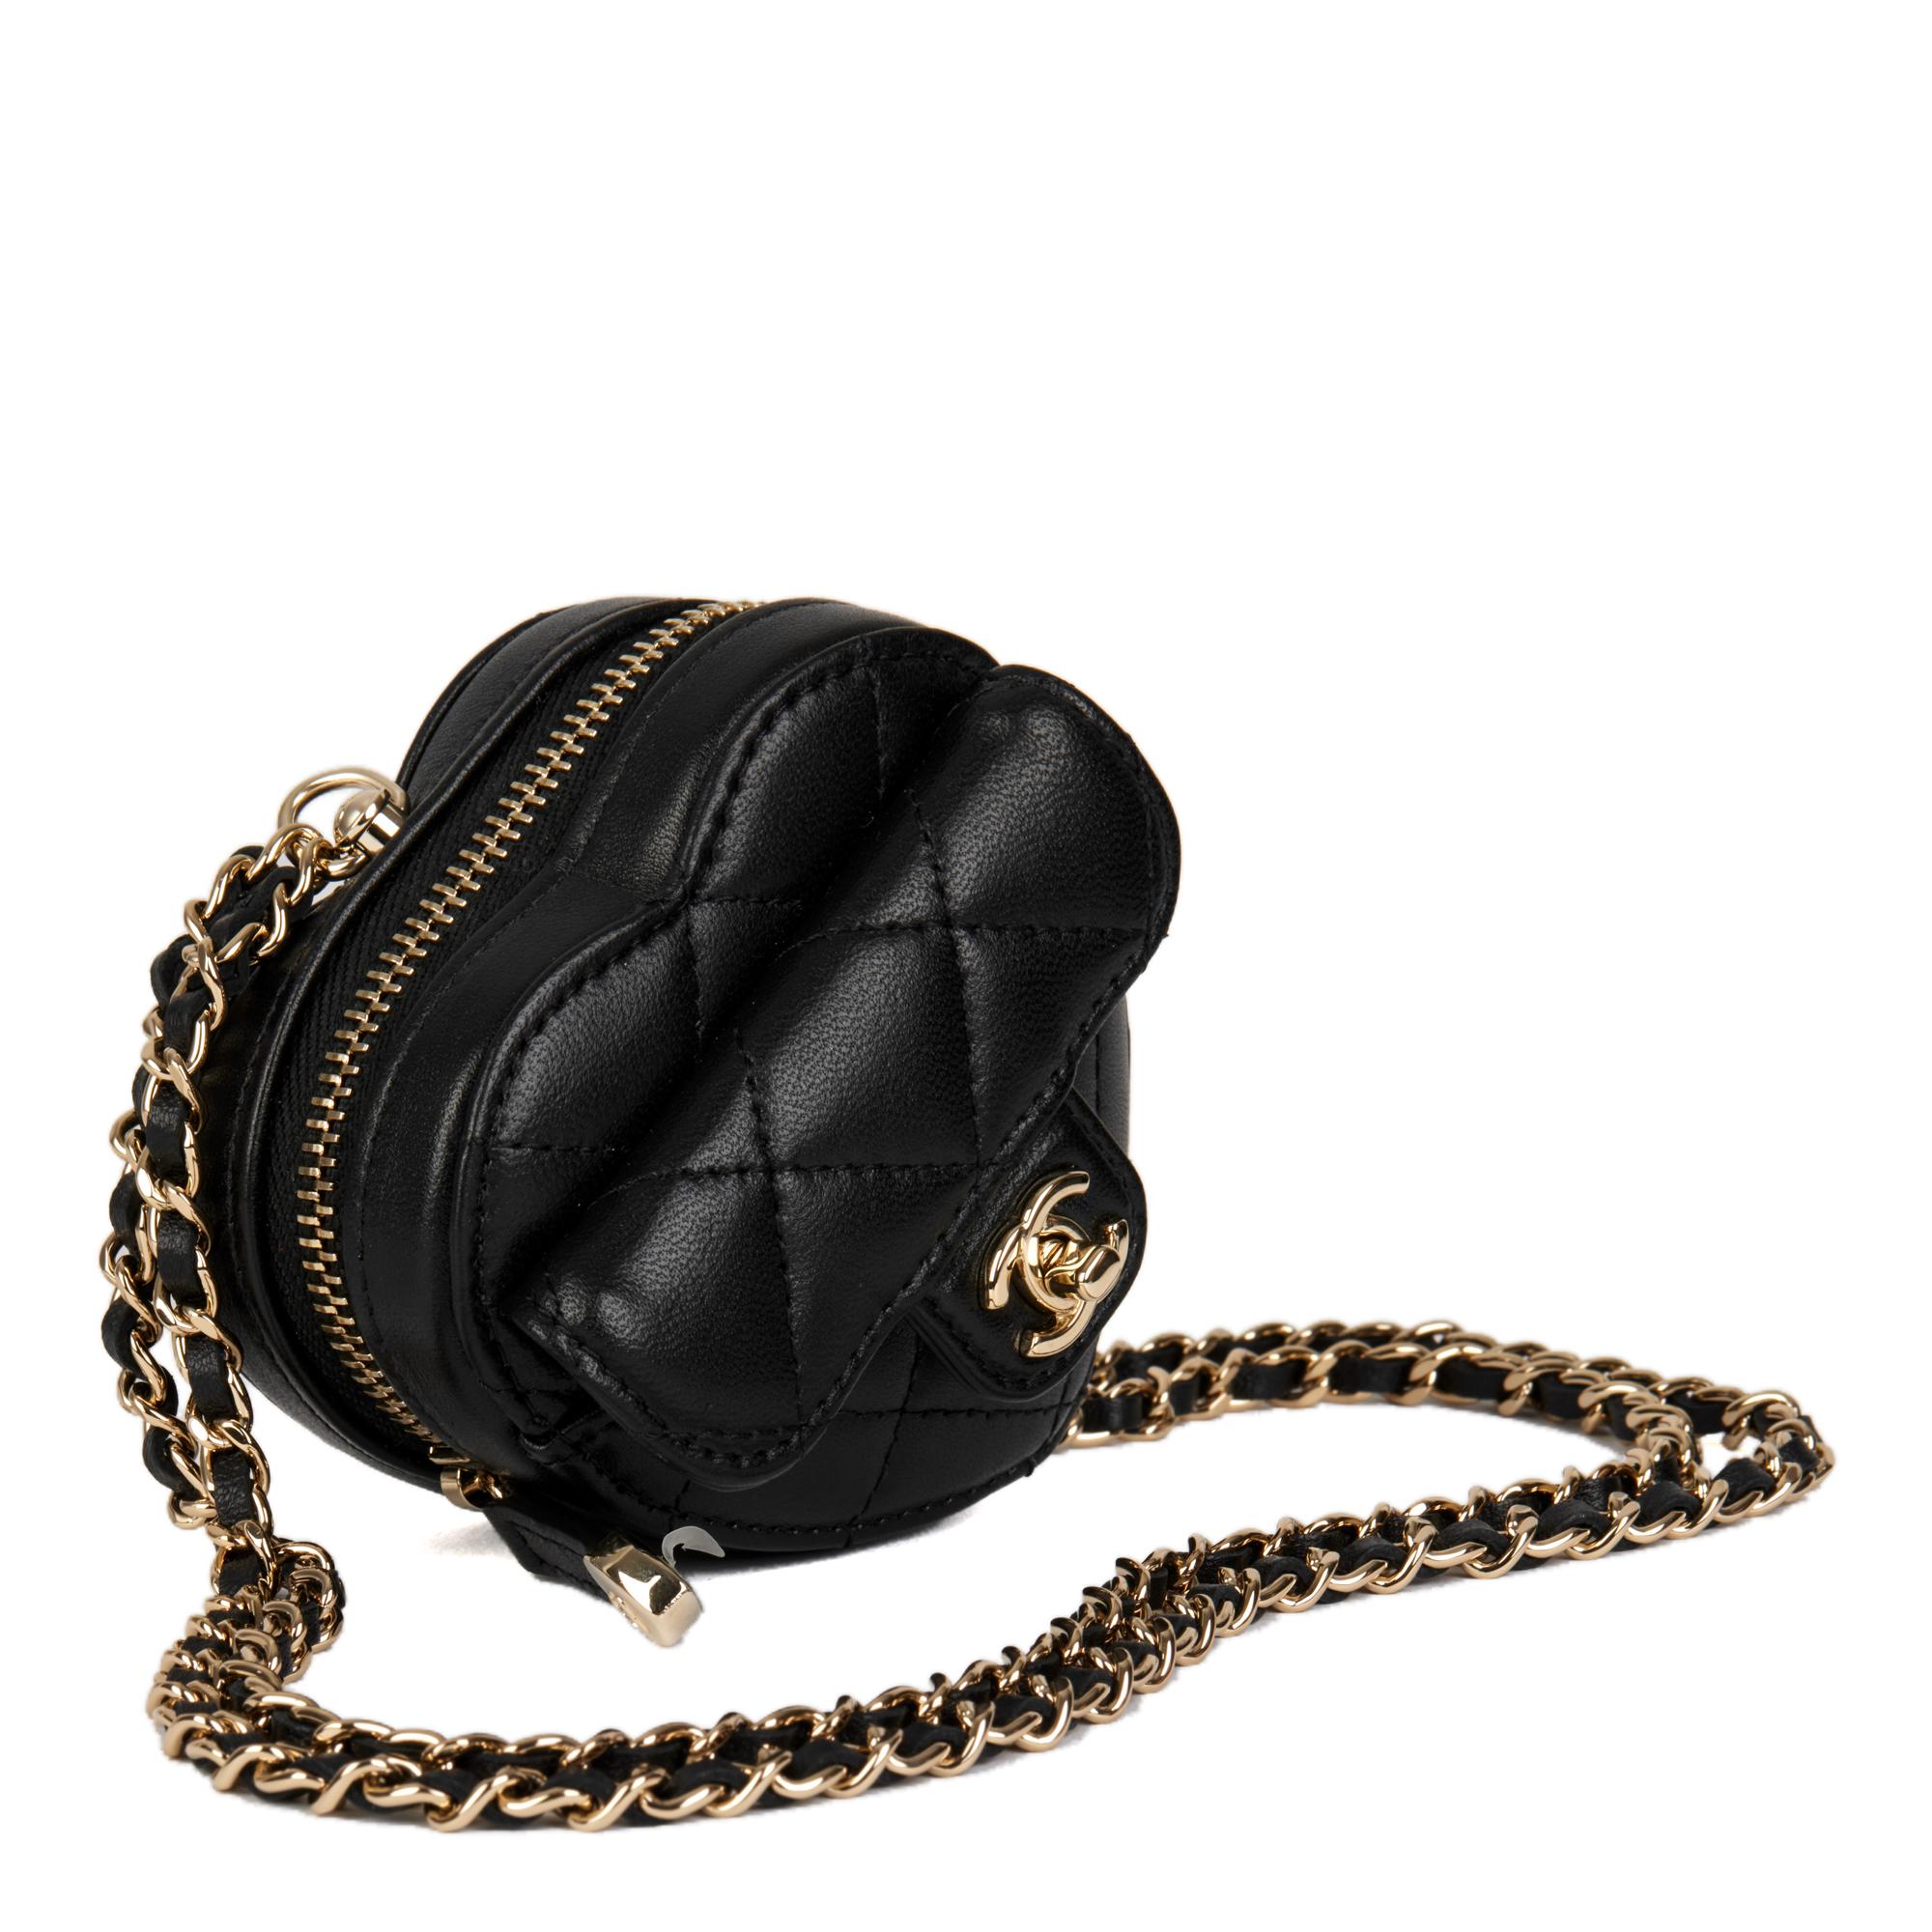 CHANEL
Black Quilted Lambskin Micro Love Heart

Serial Number: 32013022
Age (Circa): 2022
Accompanied By: Chanel Dust Bag, Box, Authenticity Card, Care Booklet
Authenticity Details: Authenticity Card, Serial Sticker (Made in Italy)
Gender: